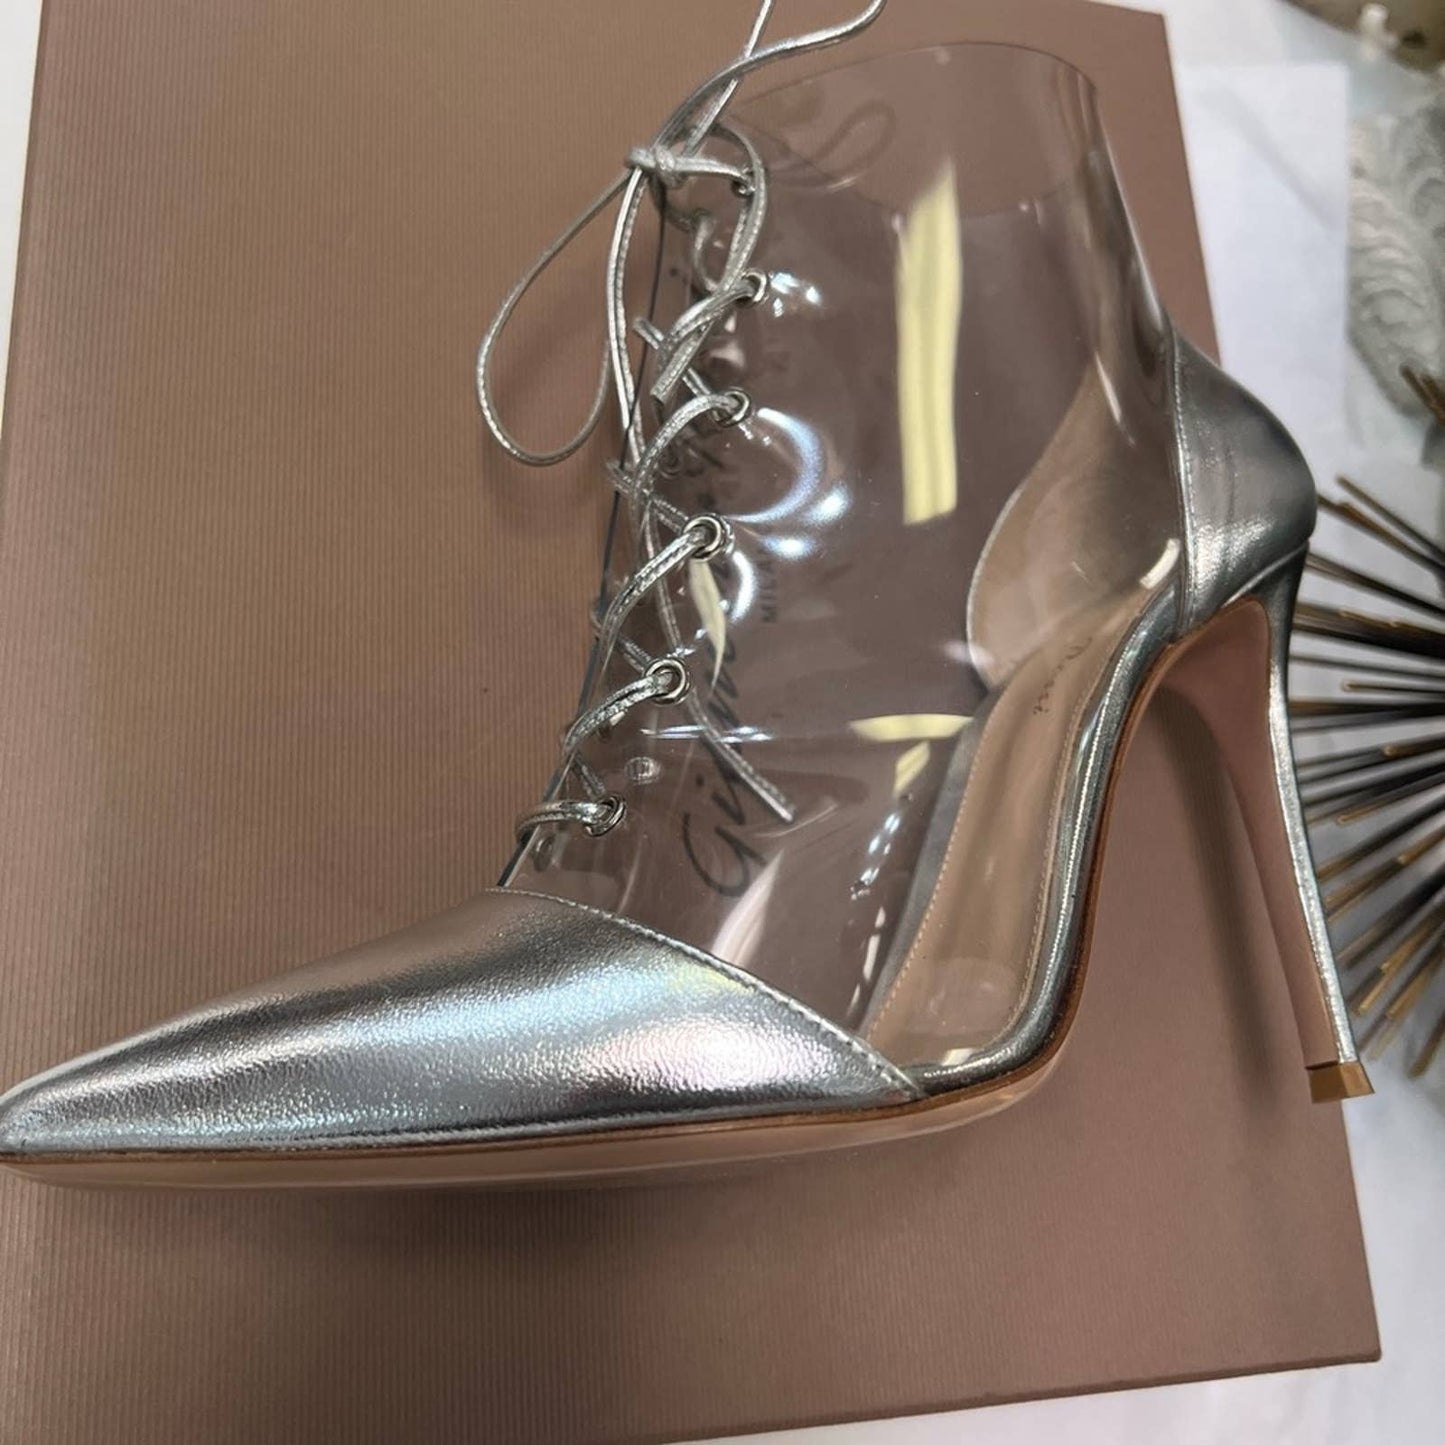 GIANVITO ROSSI Silver Lucite Heel Ankle Boots 8.5